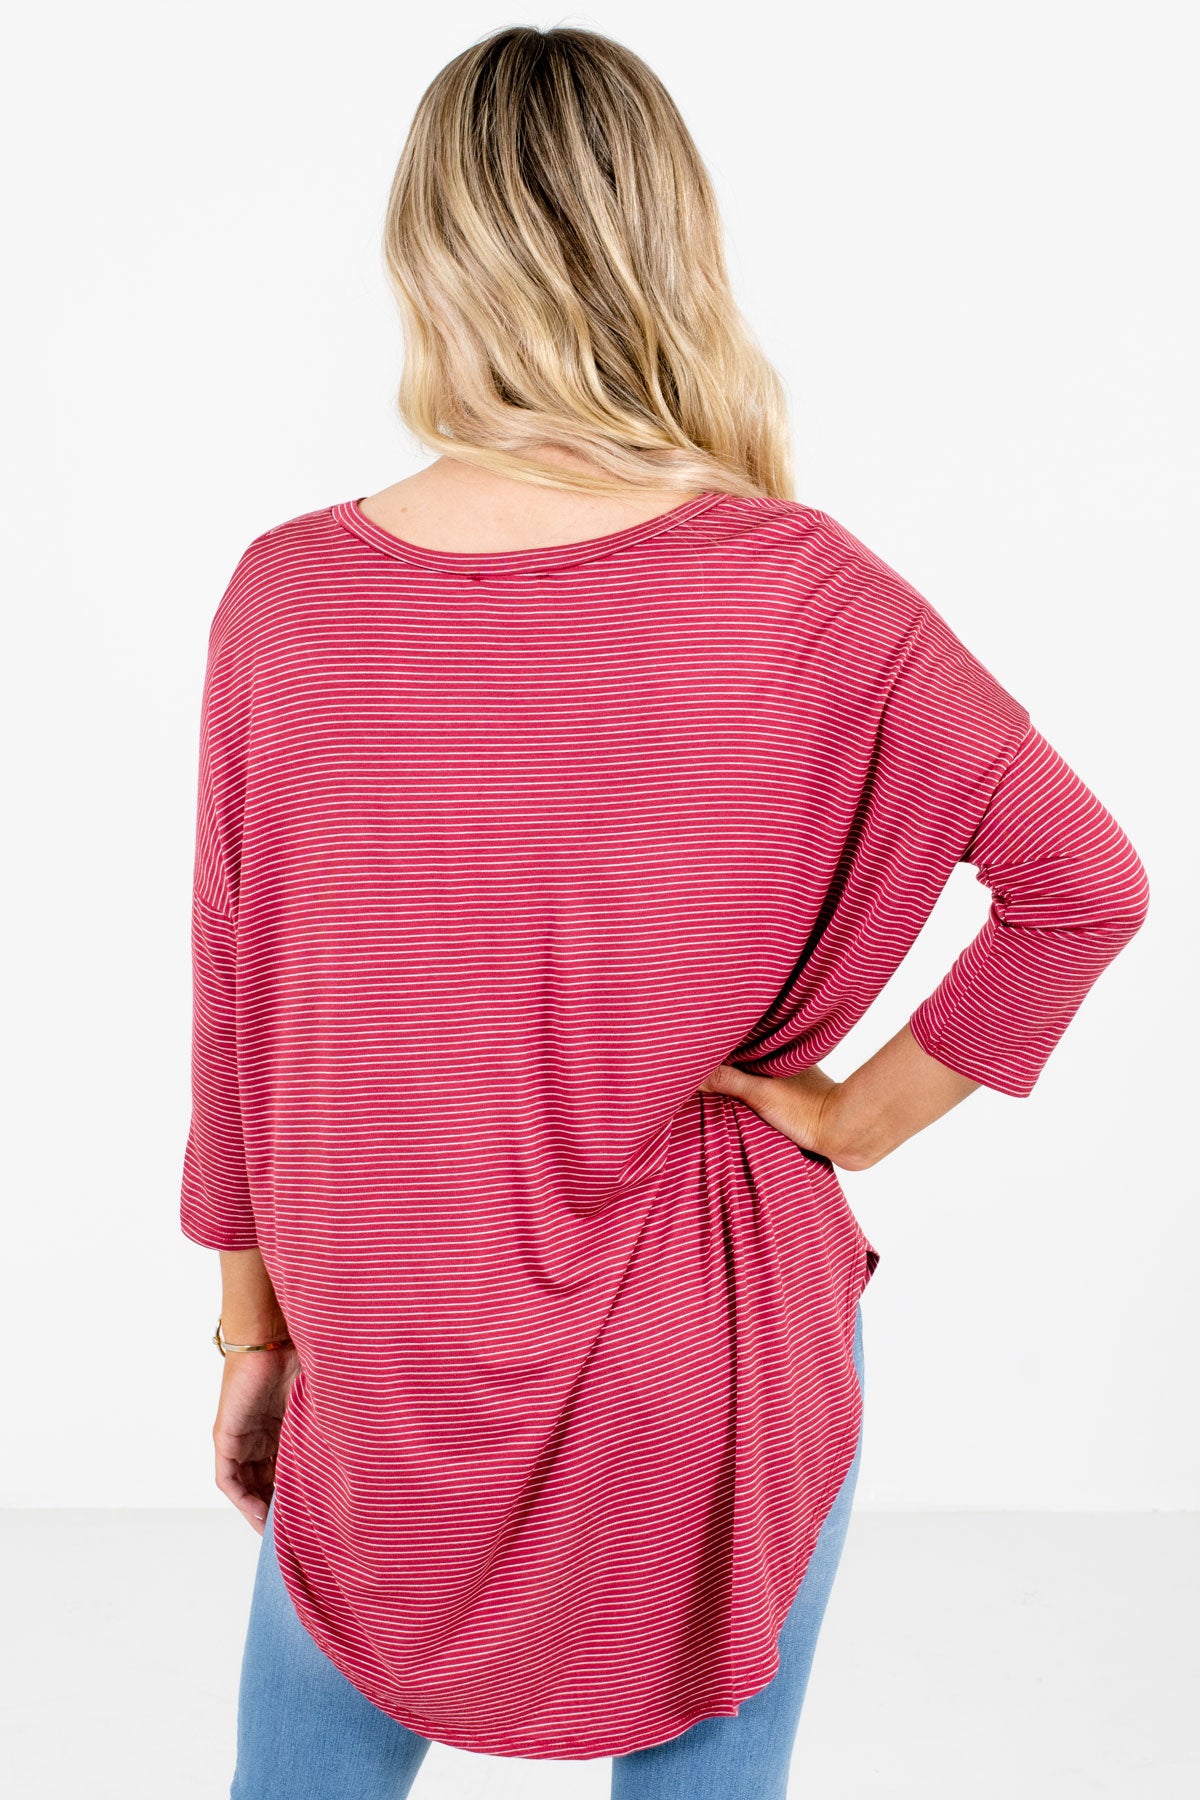 Women’s Red ¾ Length Sleeve Boutique Tops